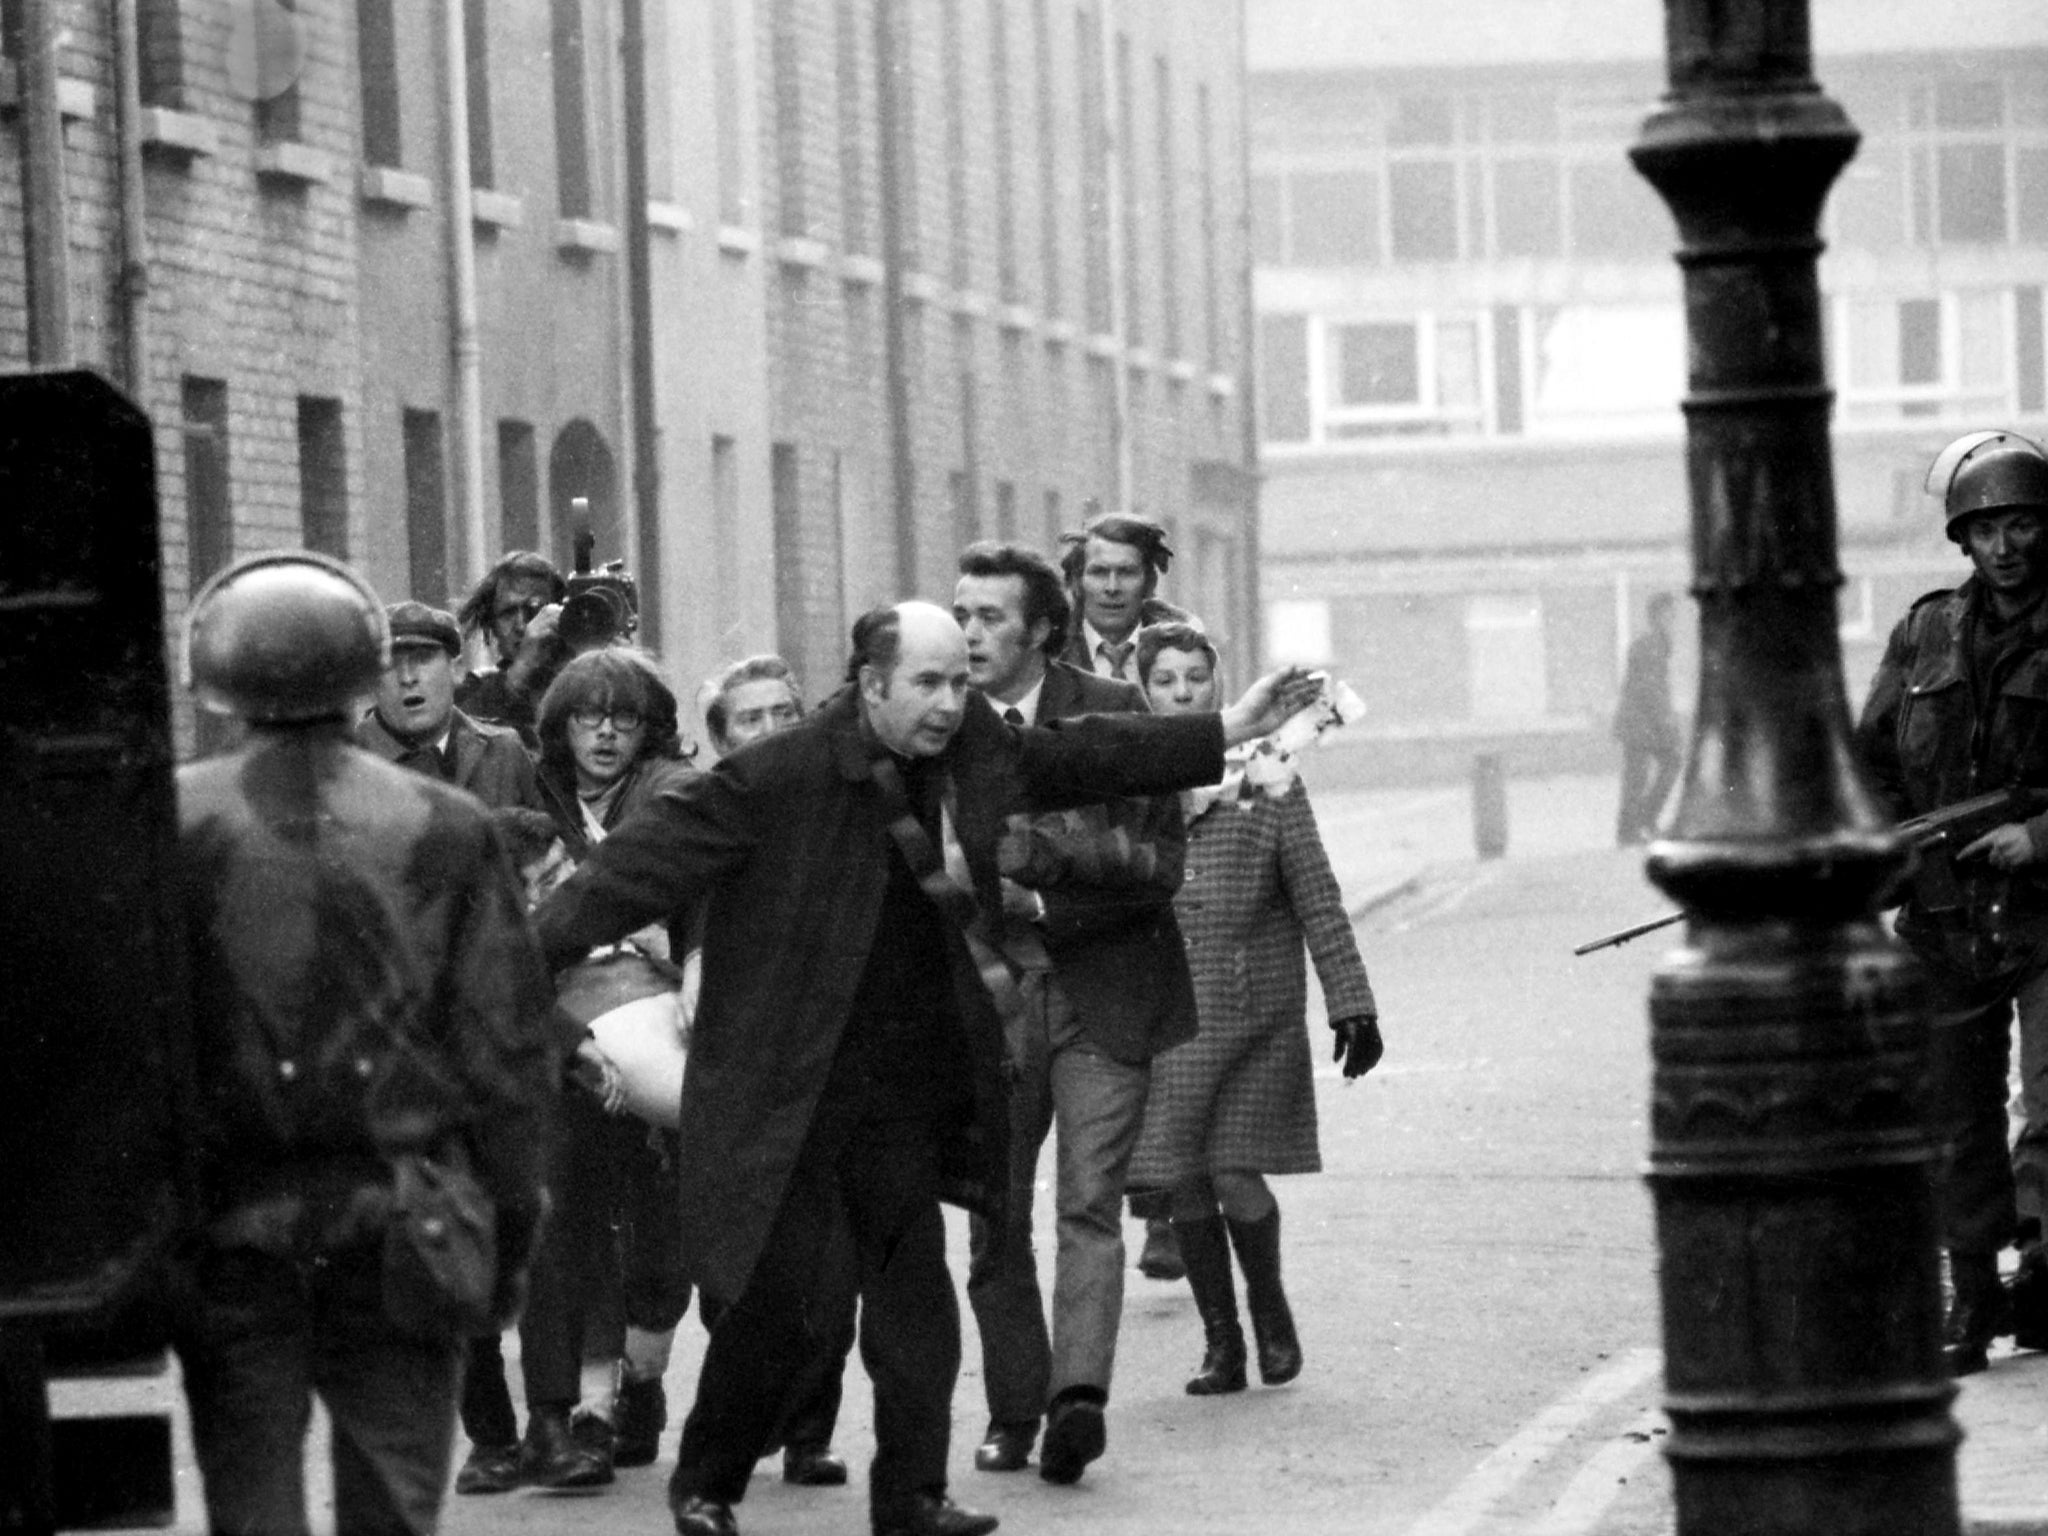 Father Edward Daly, later Bishop of Derry, waves a blood-stained white handkerchief at soldiers as a mortally wounded protester is carried away, on 30 January 1972